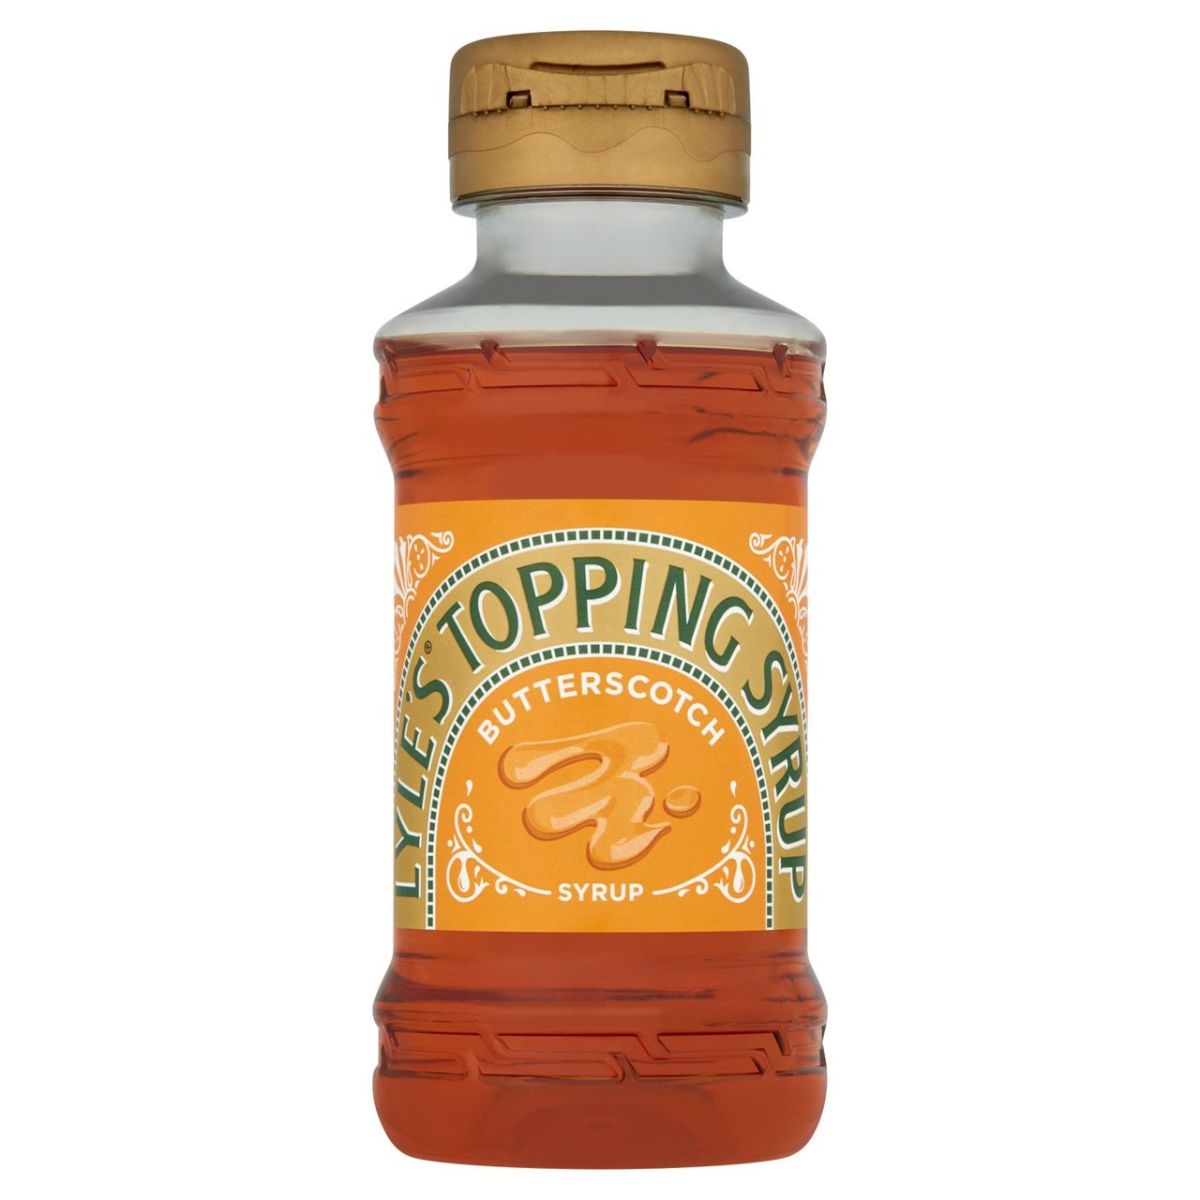 A bottle of Lyle's Topping Syrup Butterscotch - 325g.